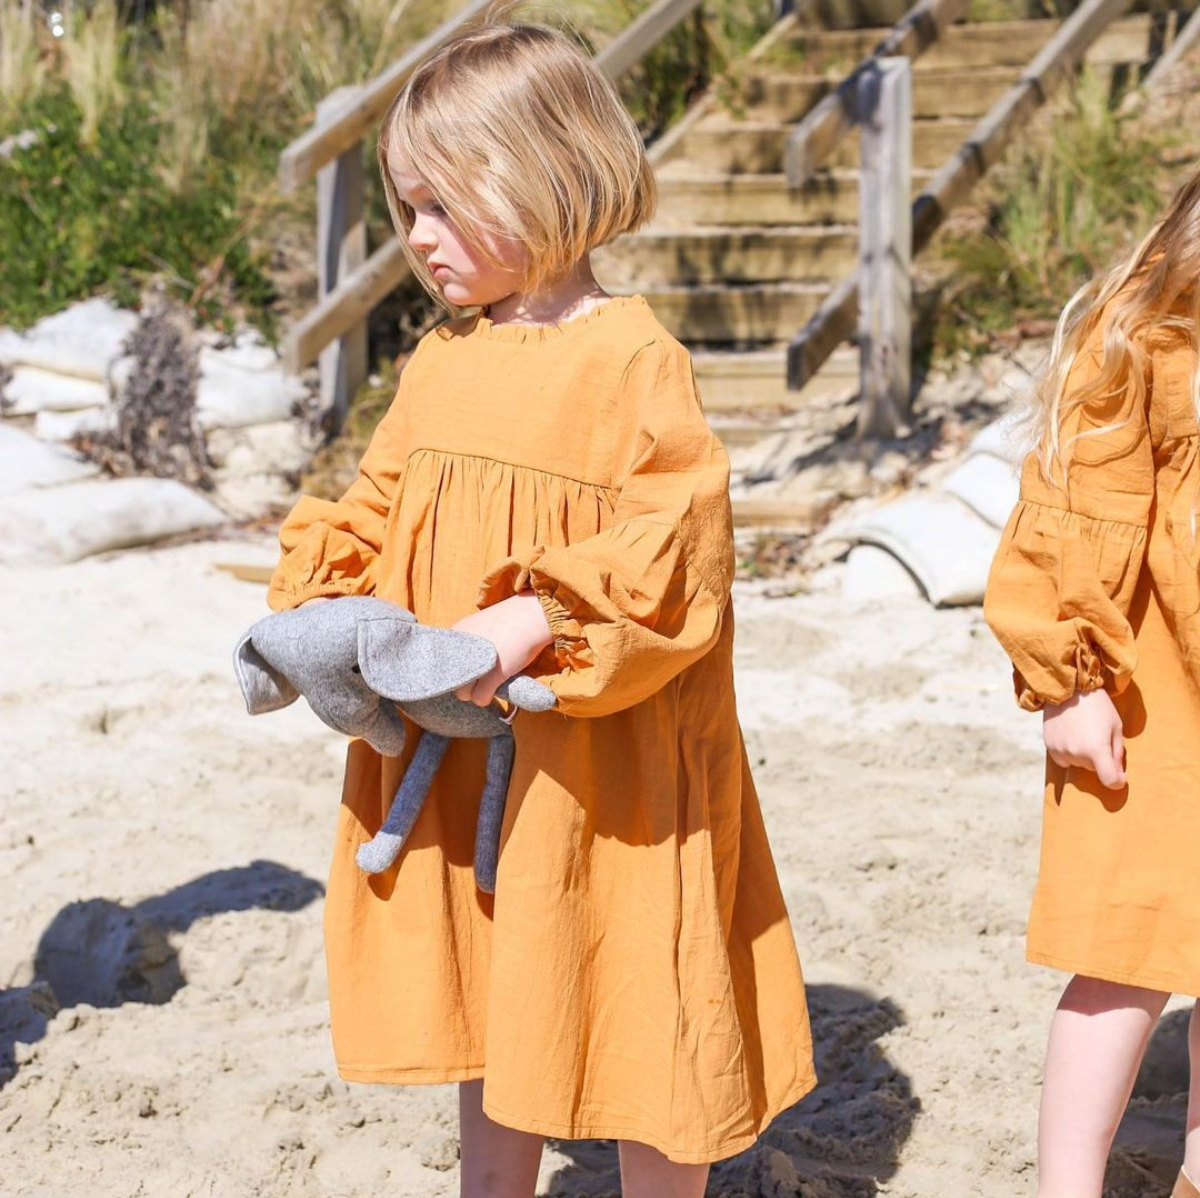 The Poppy dress features a ruffled neck with fluted sleeves. With a hemline that falls well below the knee, the Poppy dress enables your little one to run, jump and play with ease. Made from durable and easy to wash linen viscose blend. Loui the Label